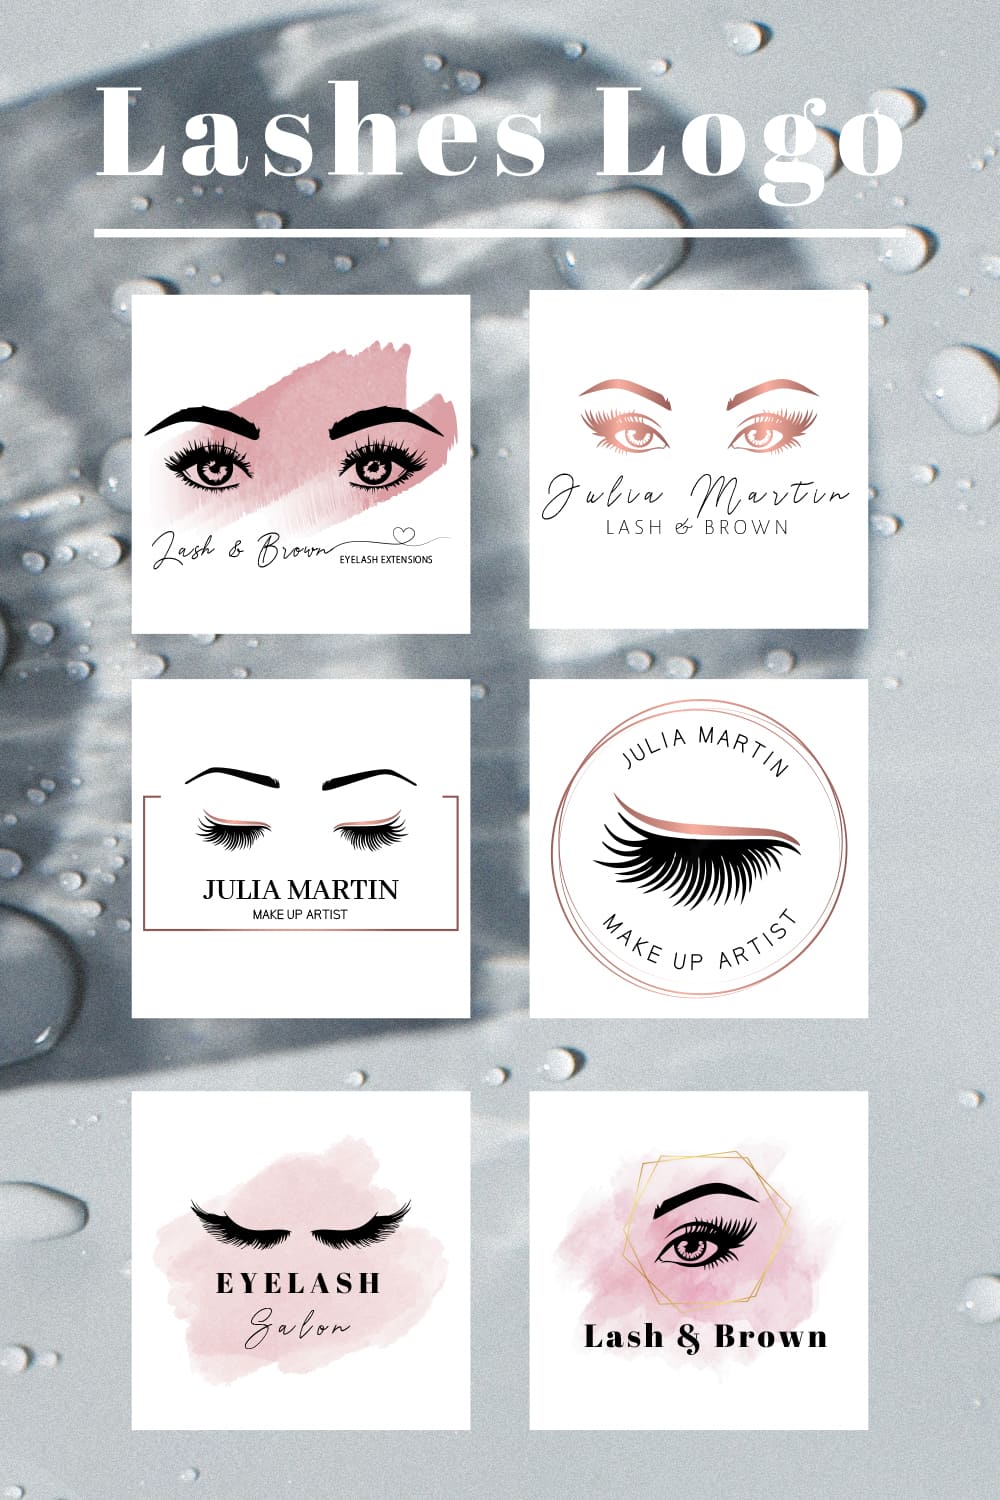 Diverse of lashes logo.